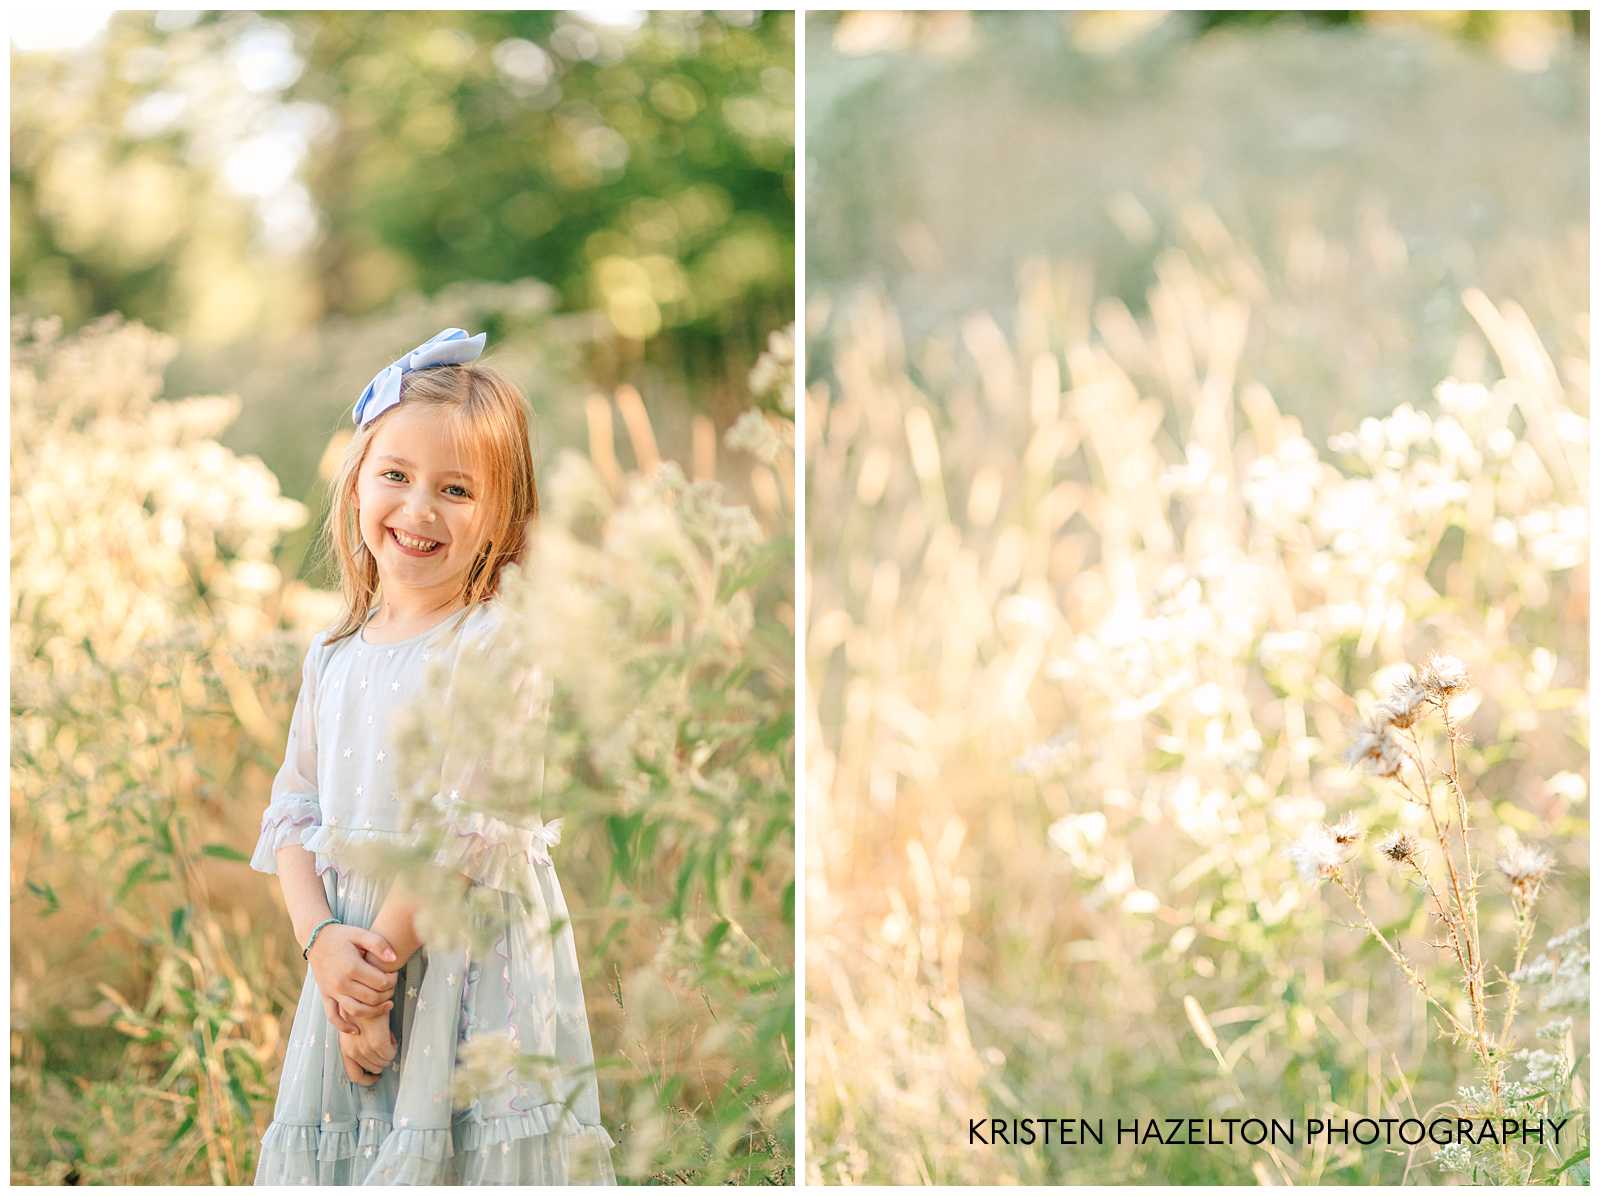 Young girl wearing a blue dress and blue bow in her hair, smiling in a field of yellow grasses. River Forest IL family portraits by Kristen Hazelton